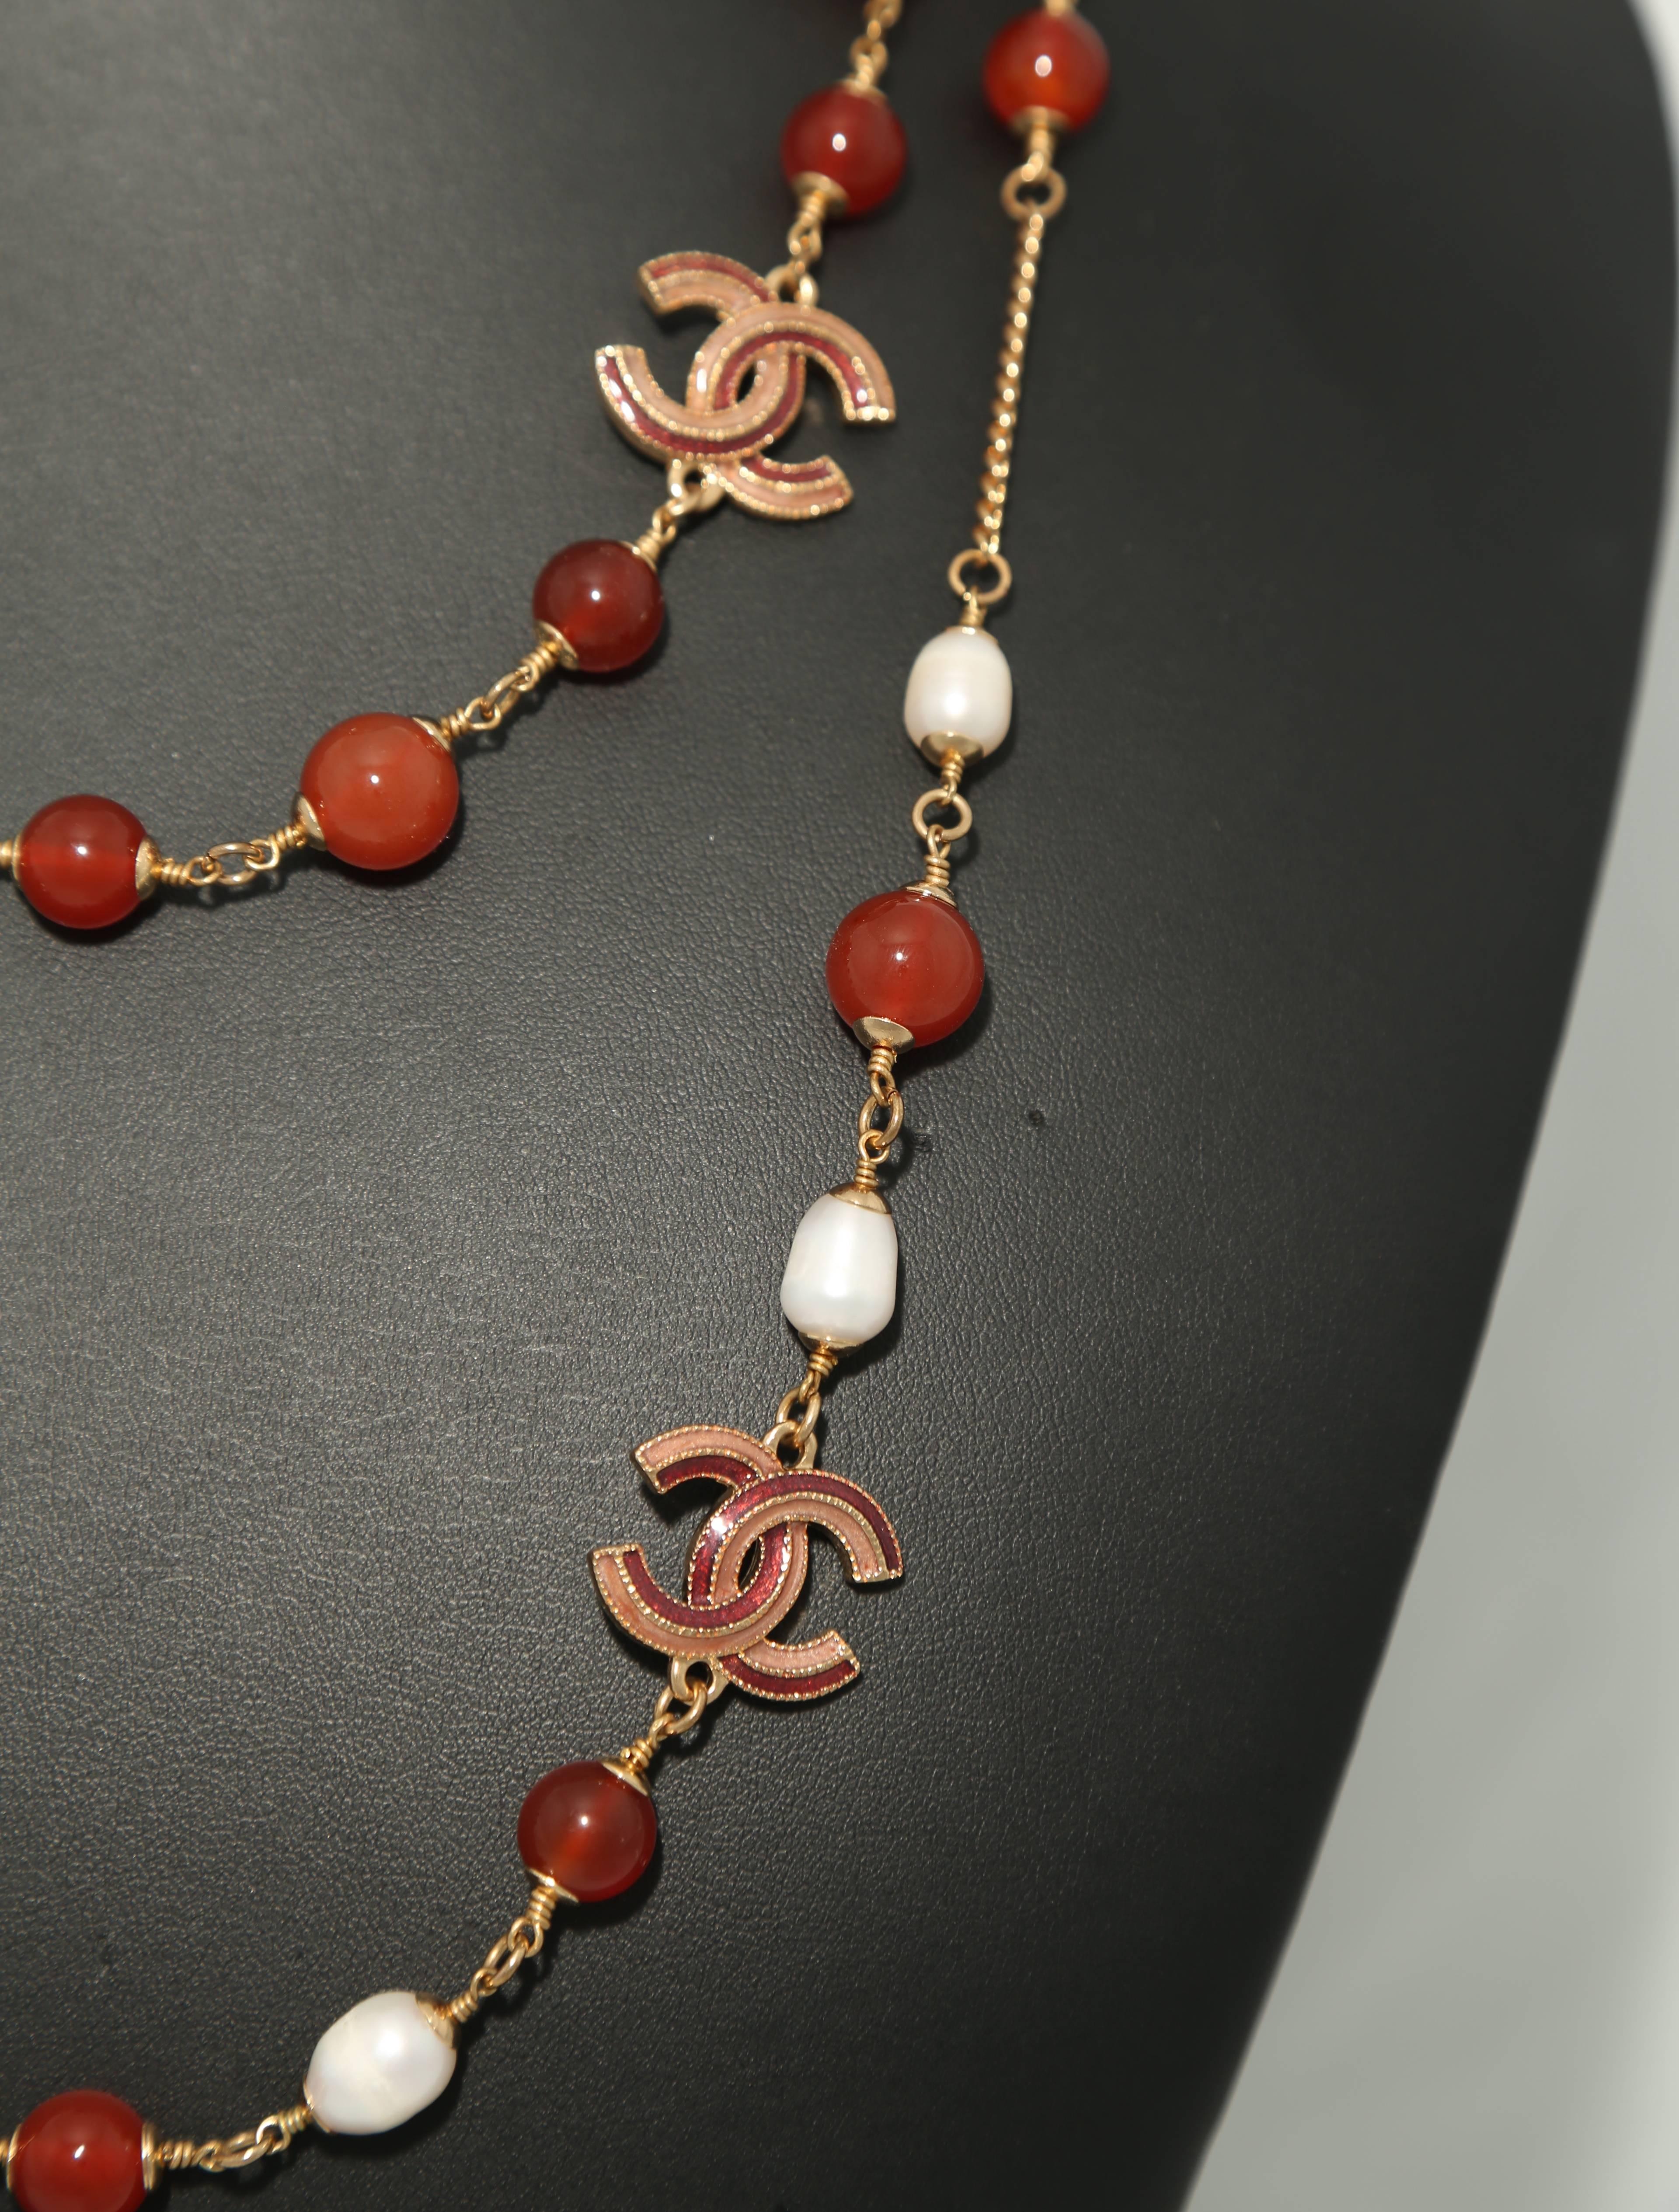 Chanel Necklace with agate and pearls

measured flat - 52 inches cc measures 1inch 
